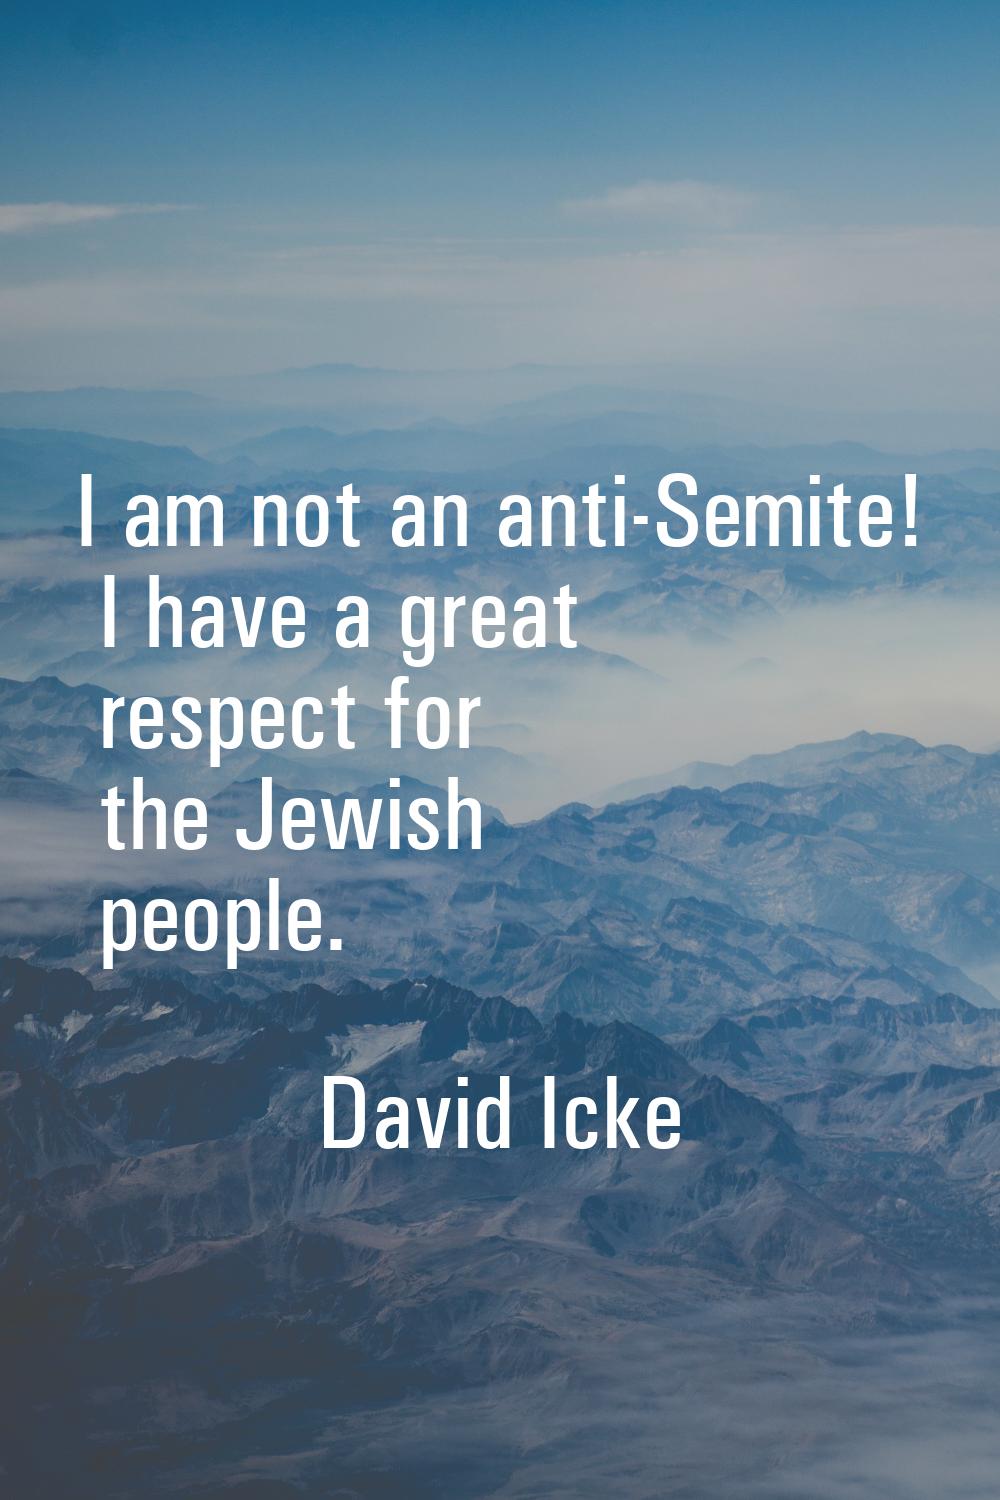 I am not an anti-Semite! I have a great respect for the Jewish people.